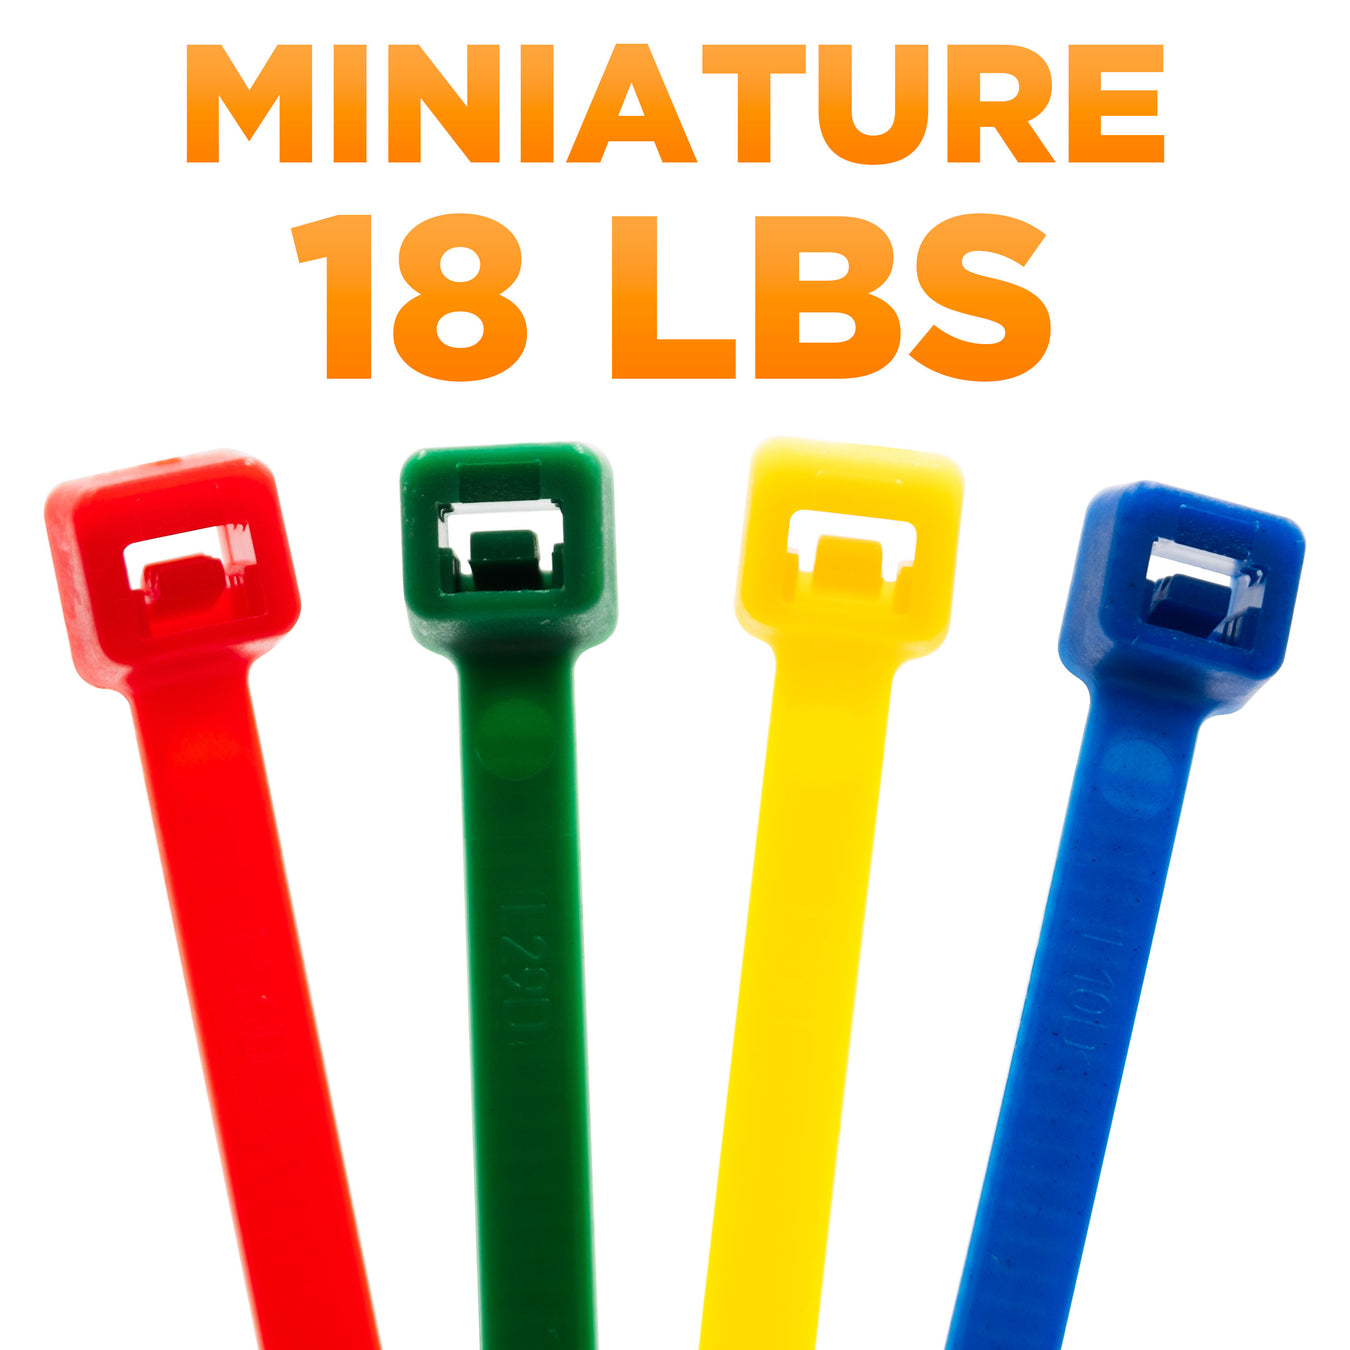 Miniature Cable Ties (18lbs)